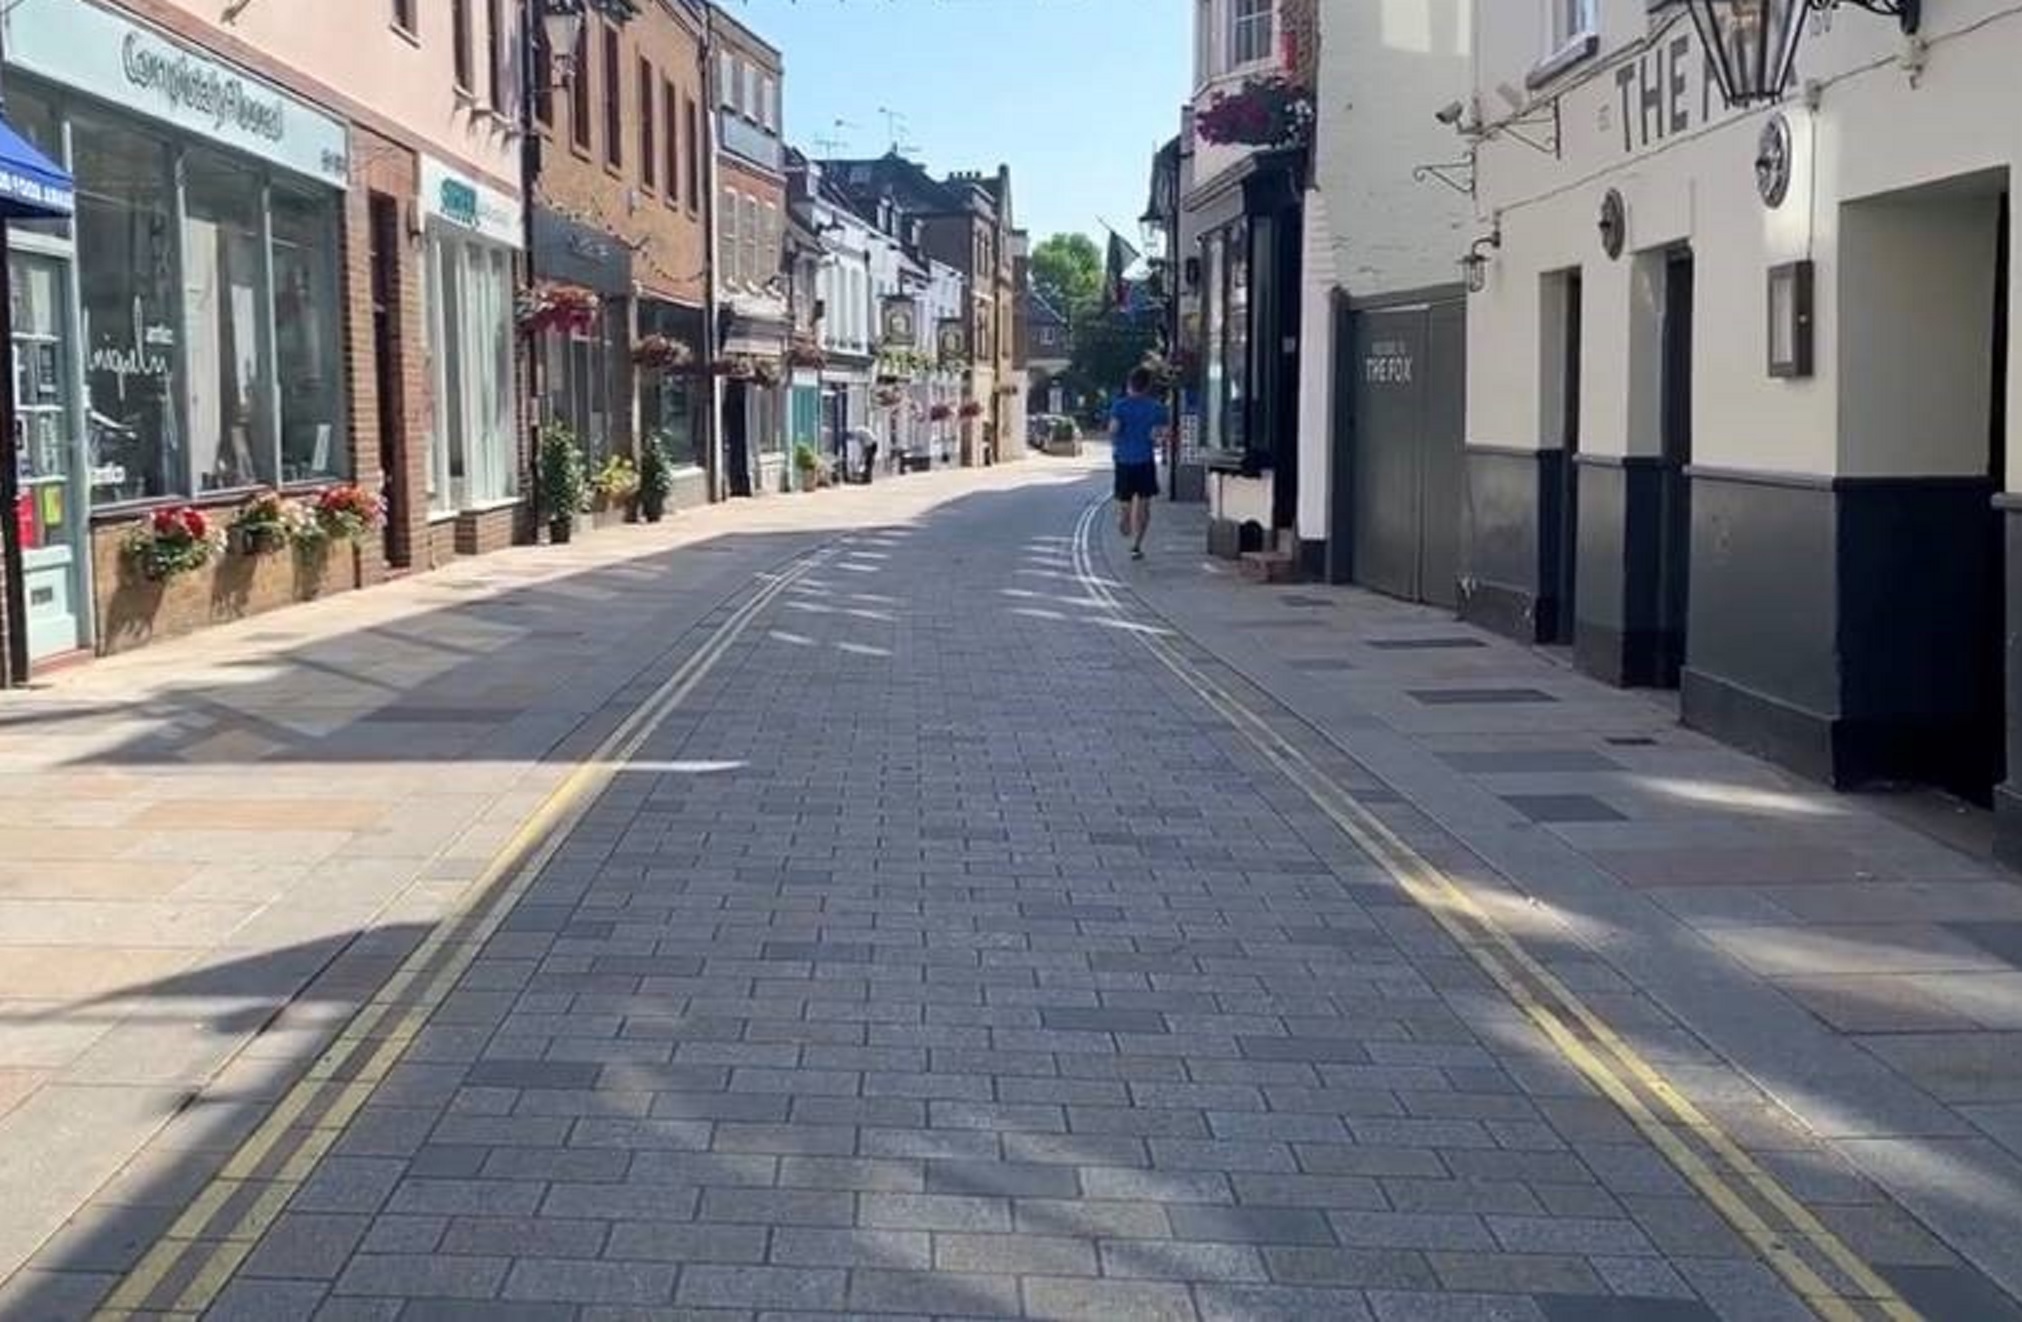 An overwhelming majority of respondents backed a permanent pedestrianised zone